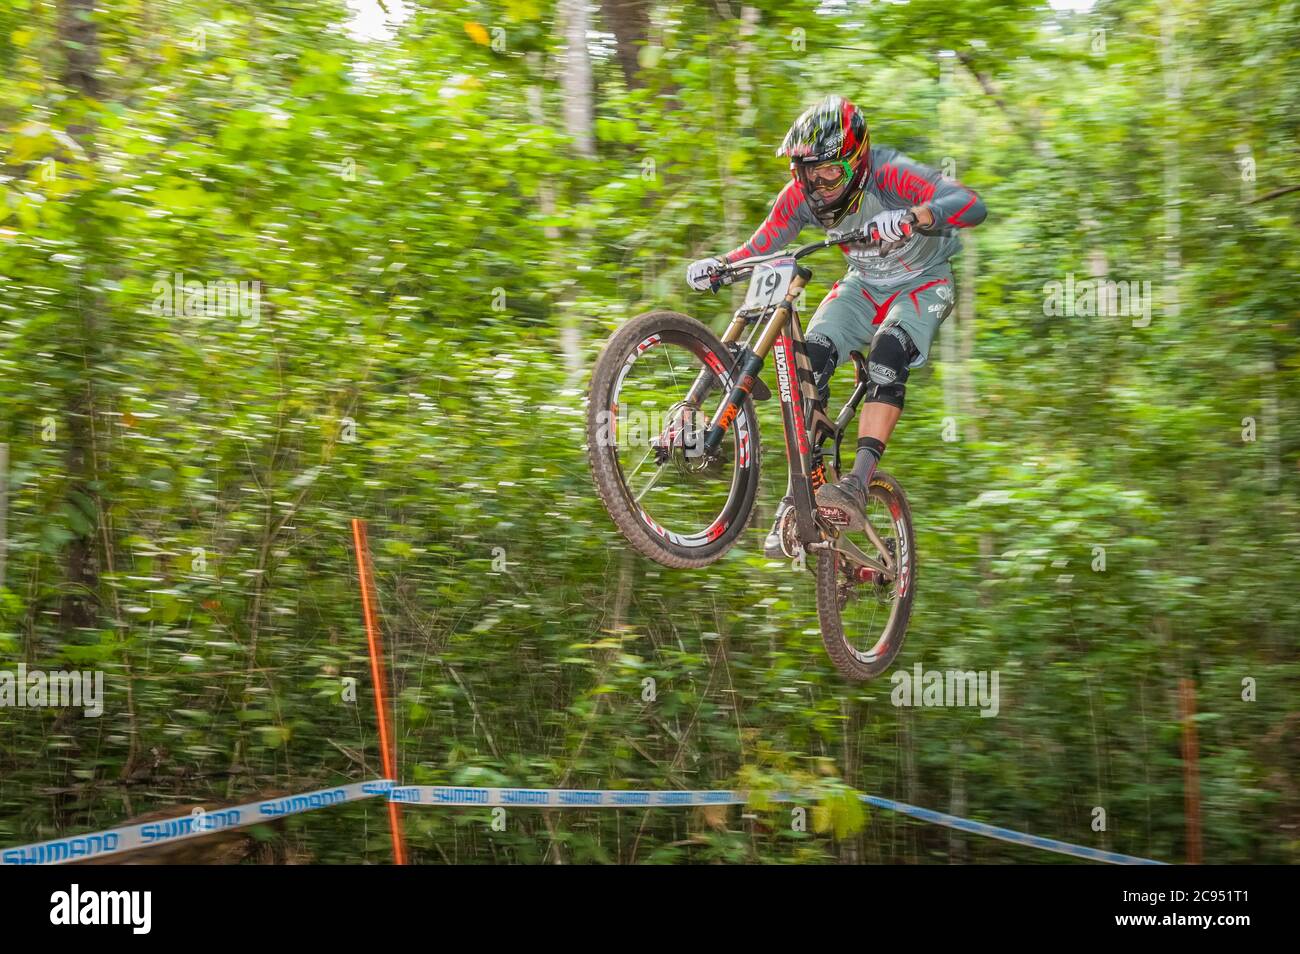 World class male competitor is airborne at the 2016 UCI World Downhill Mountain bike Championships held in Cairns, Australia. Stock Photo